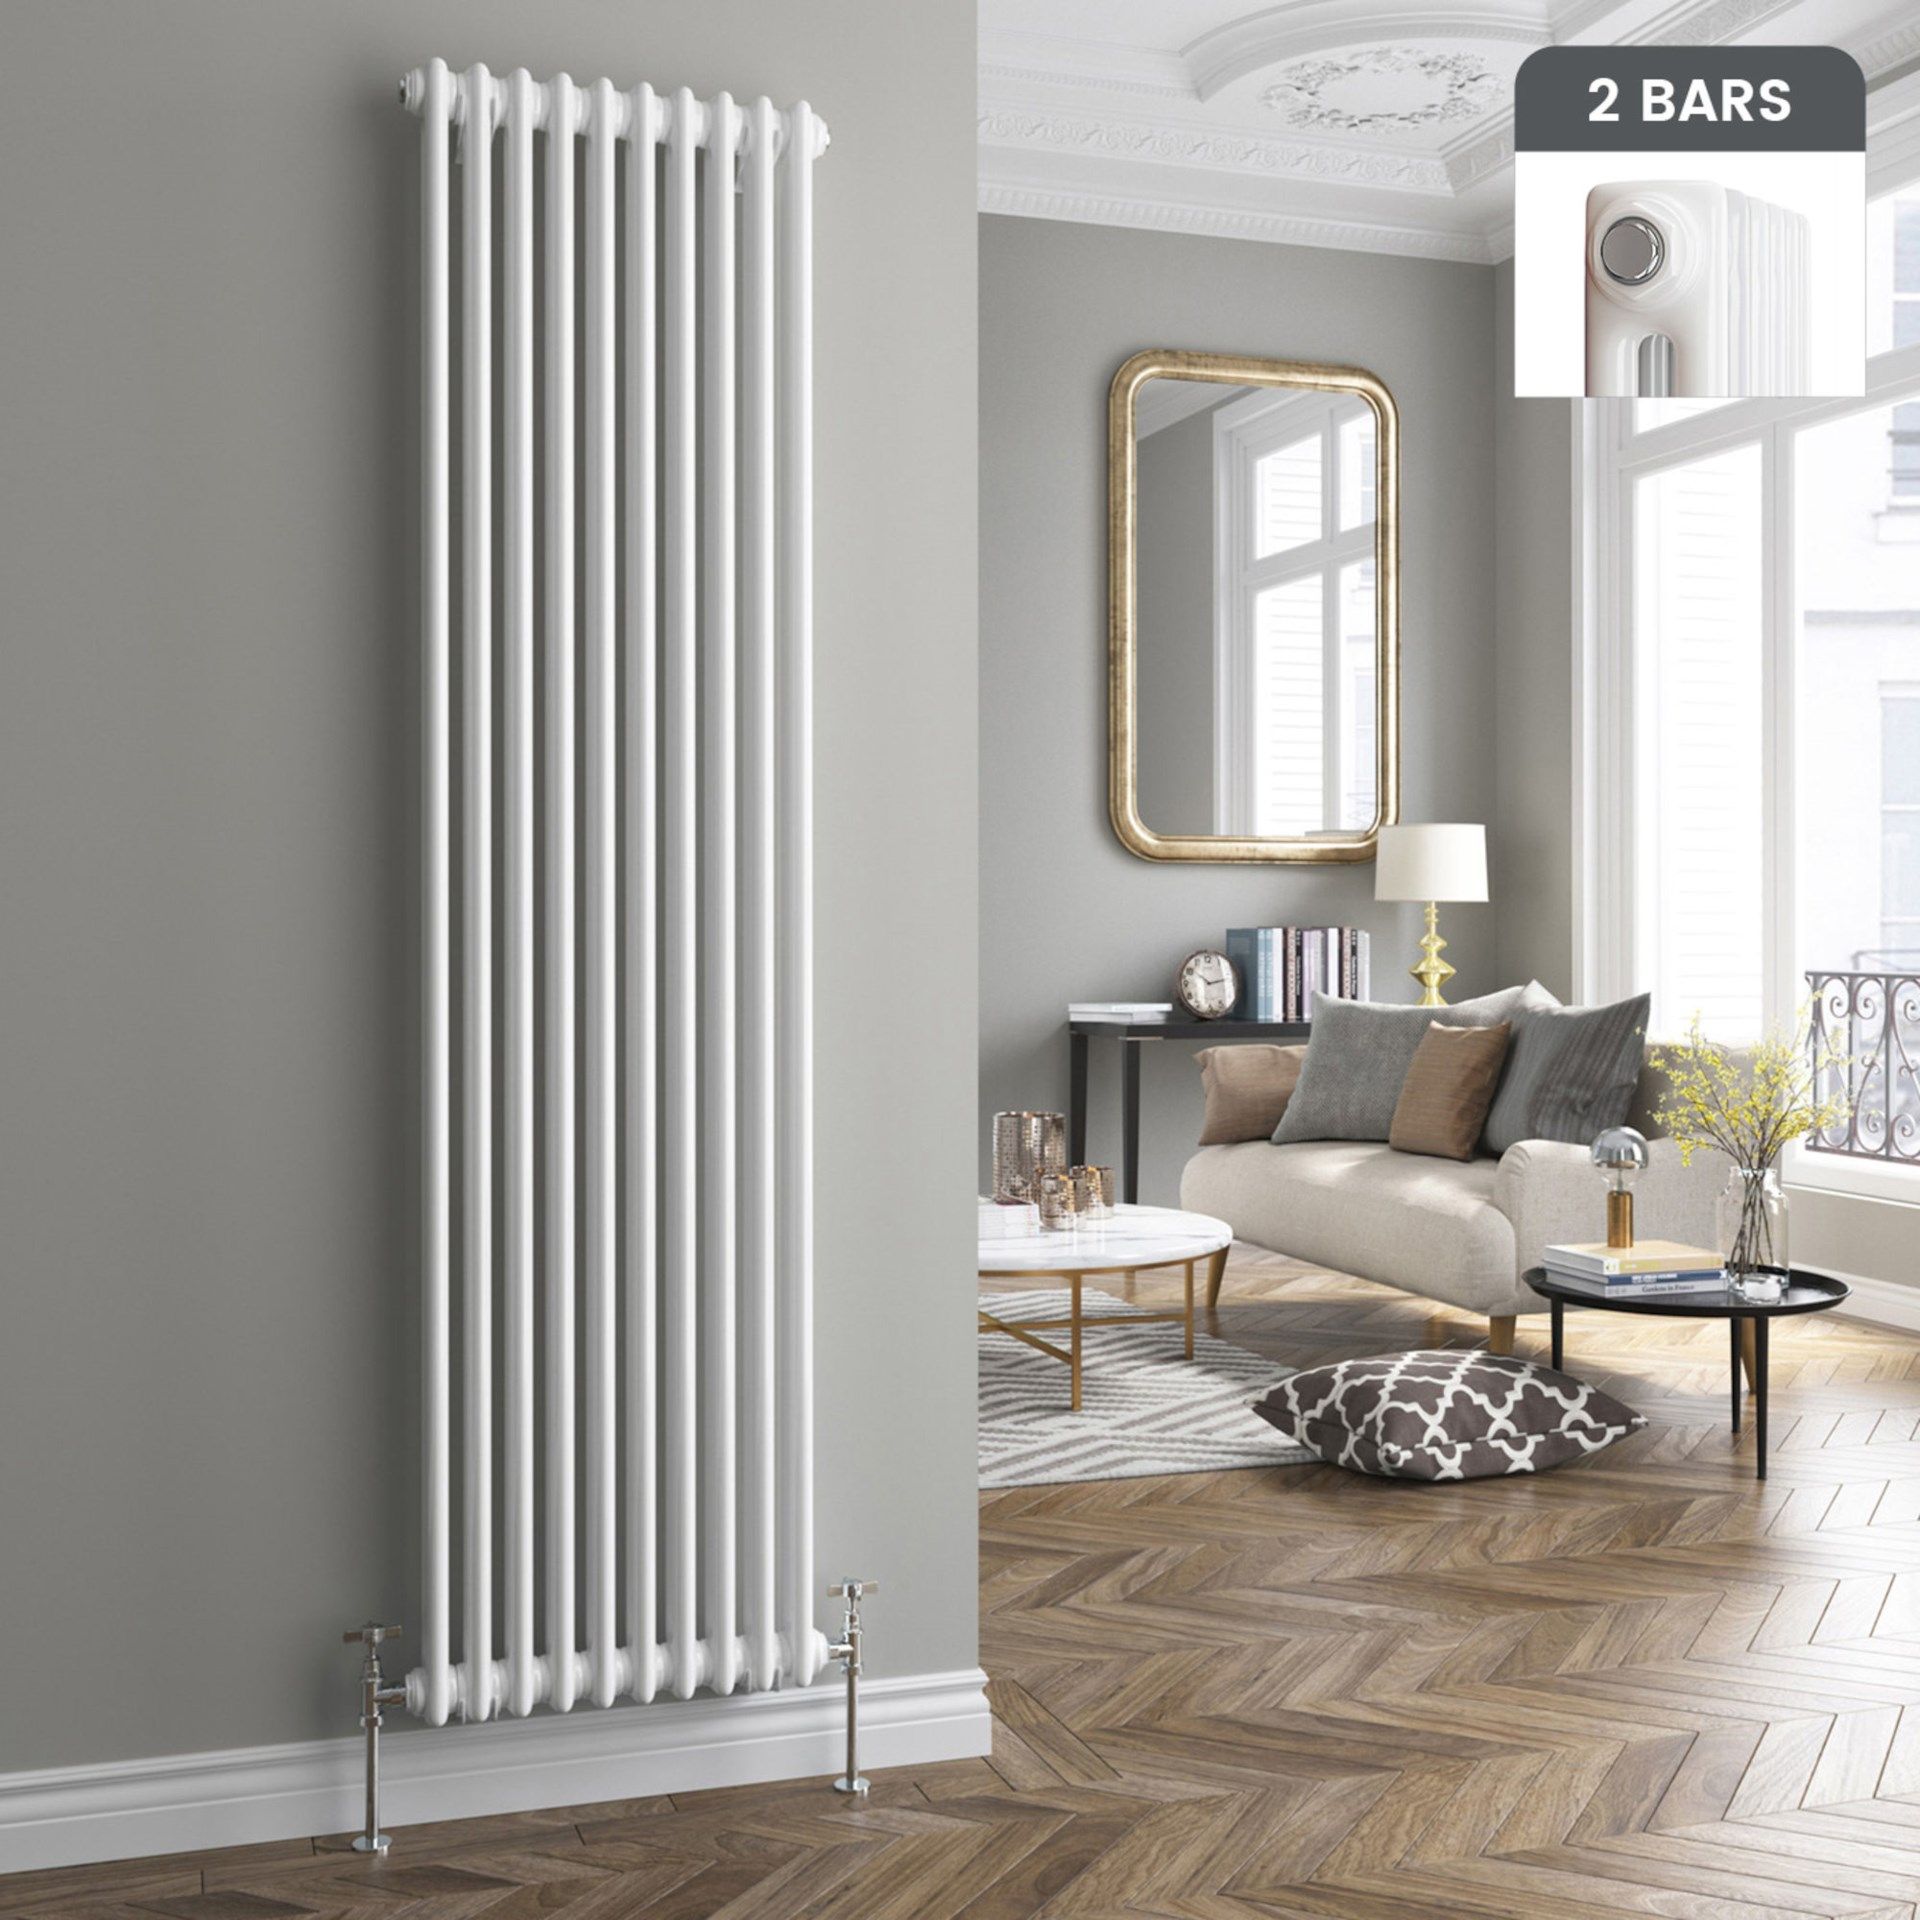 (PC143) 2000x490mm White Double Panel Vertical Colosseum Traditional Radiator. RRP £488.99. Ma...( - Image 2 of 3